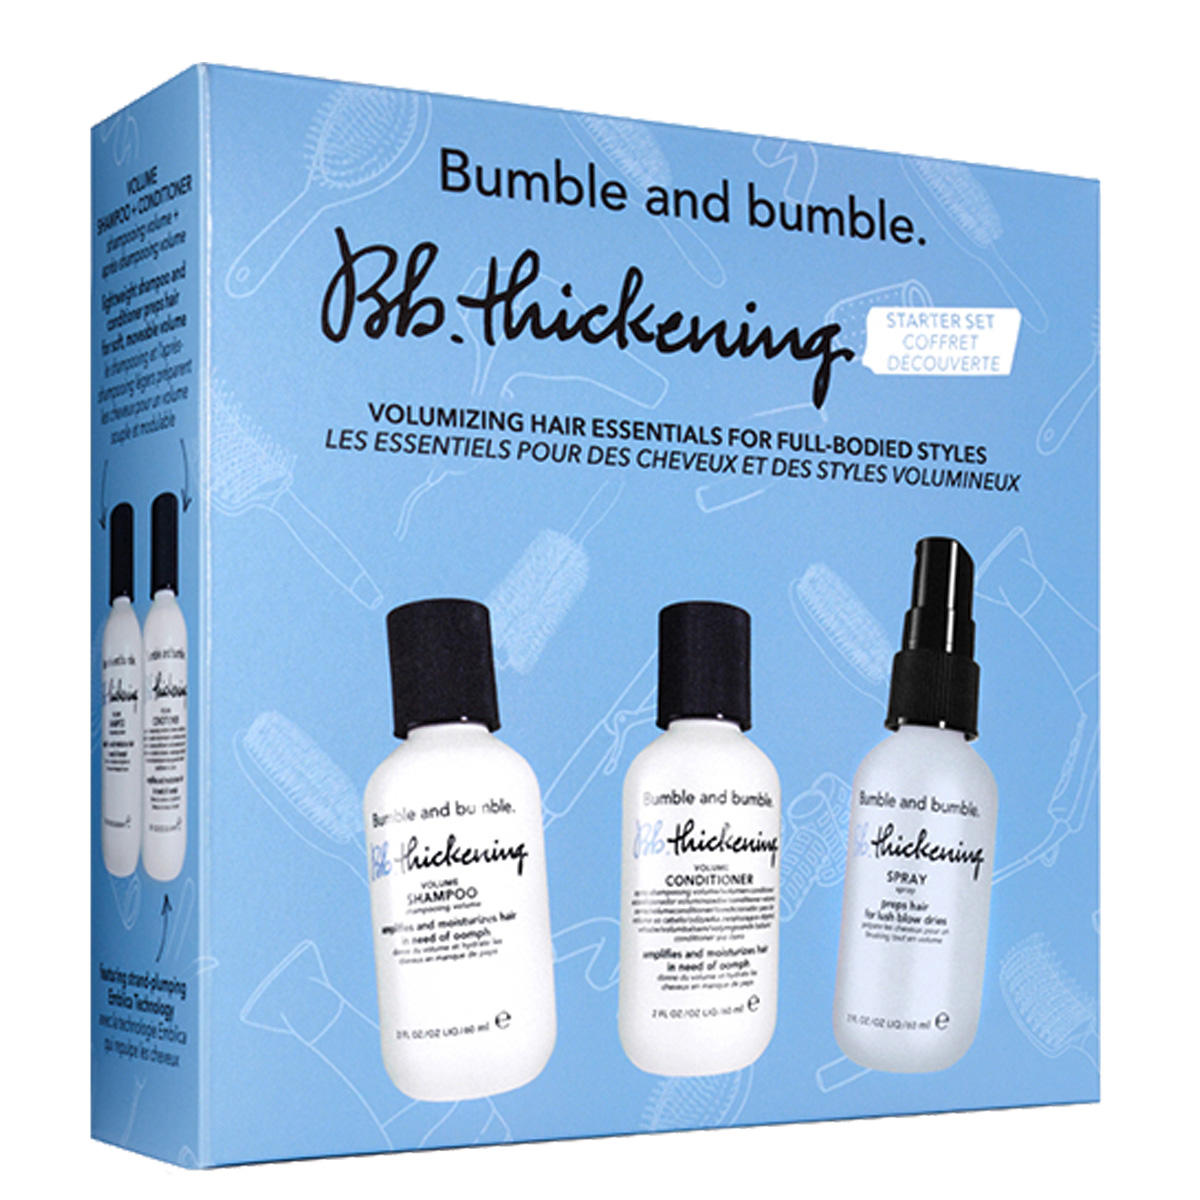 Bumble and bumble Thickening Trial Set  - 2